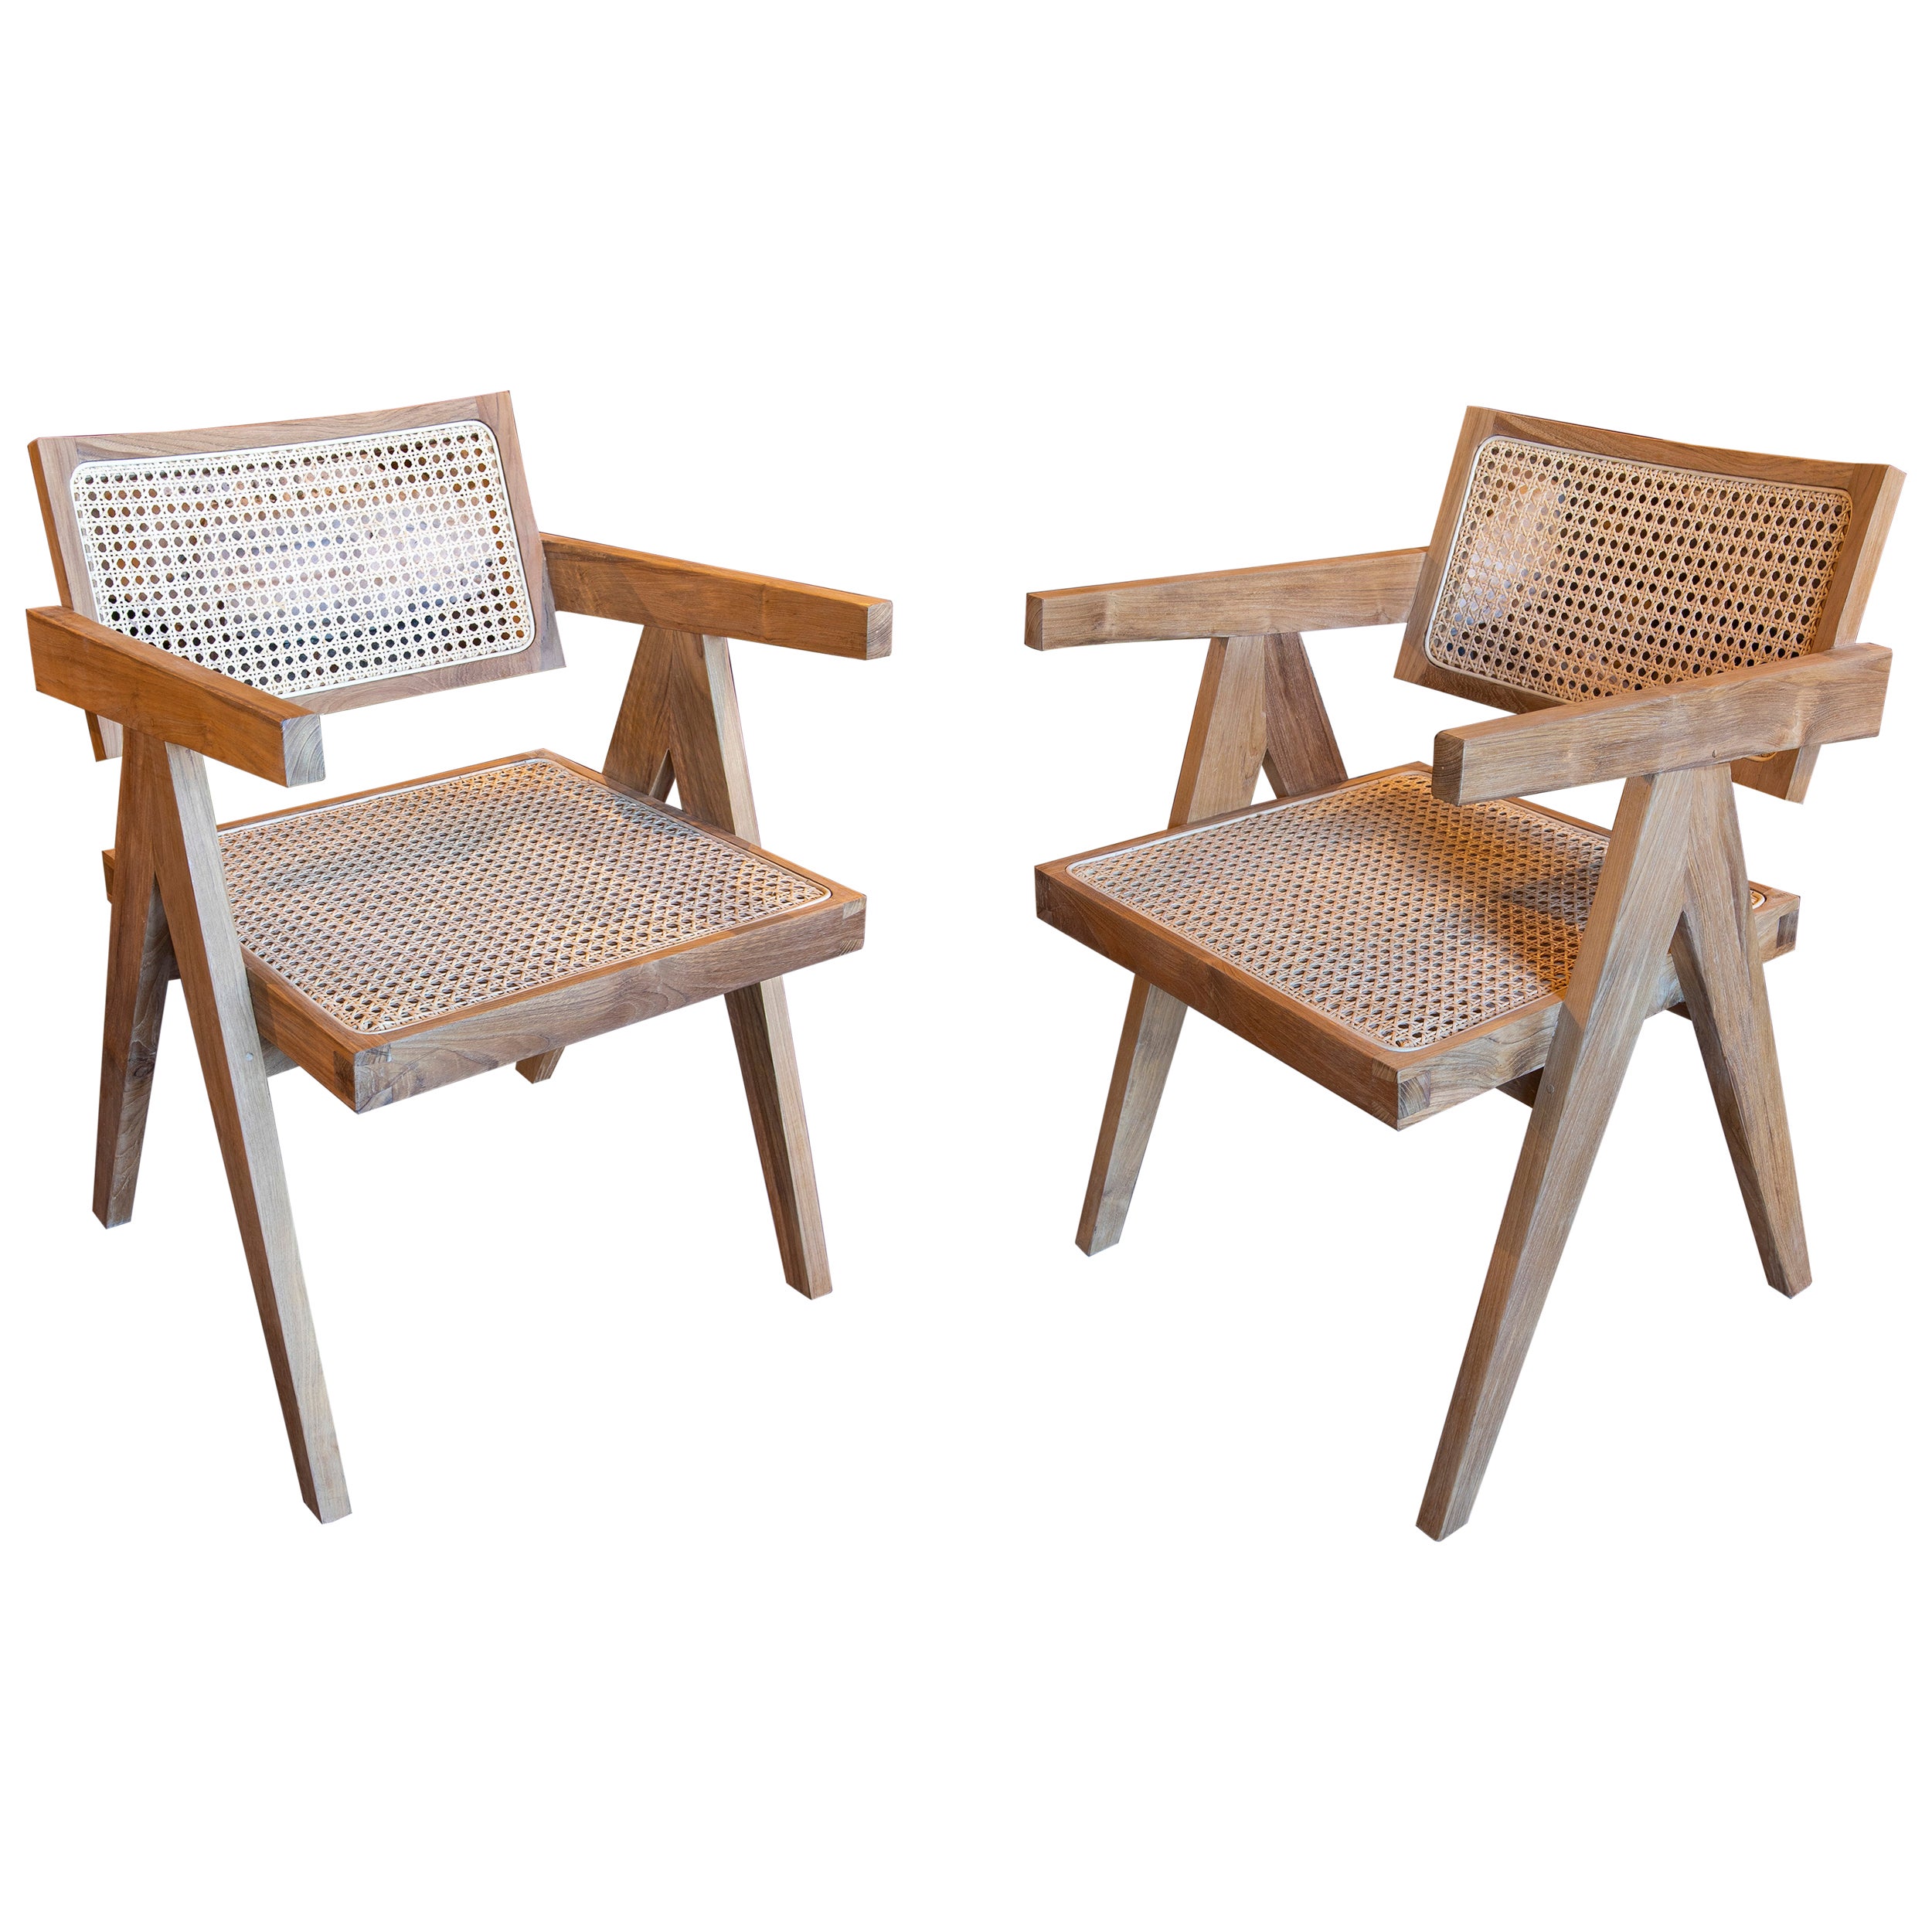 Pair of Wooden Armchairs with Wicker Backrest and Seat For Sale